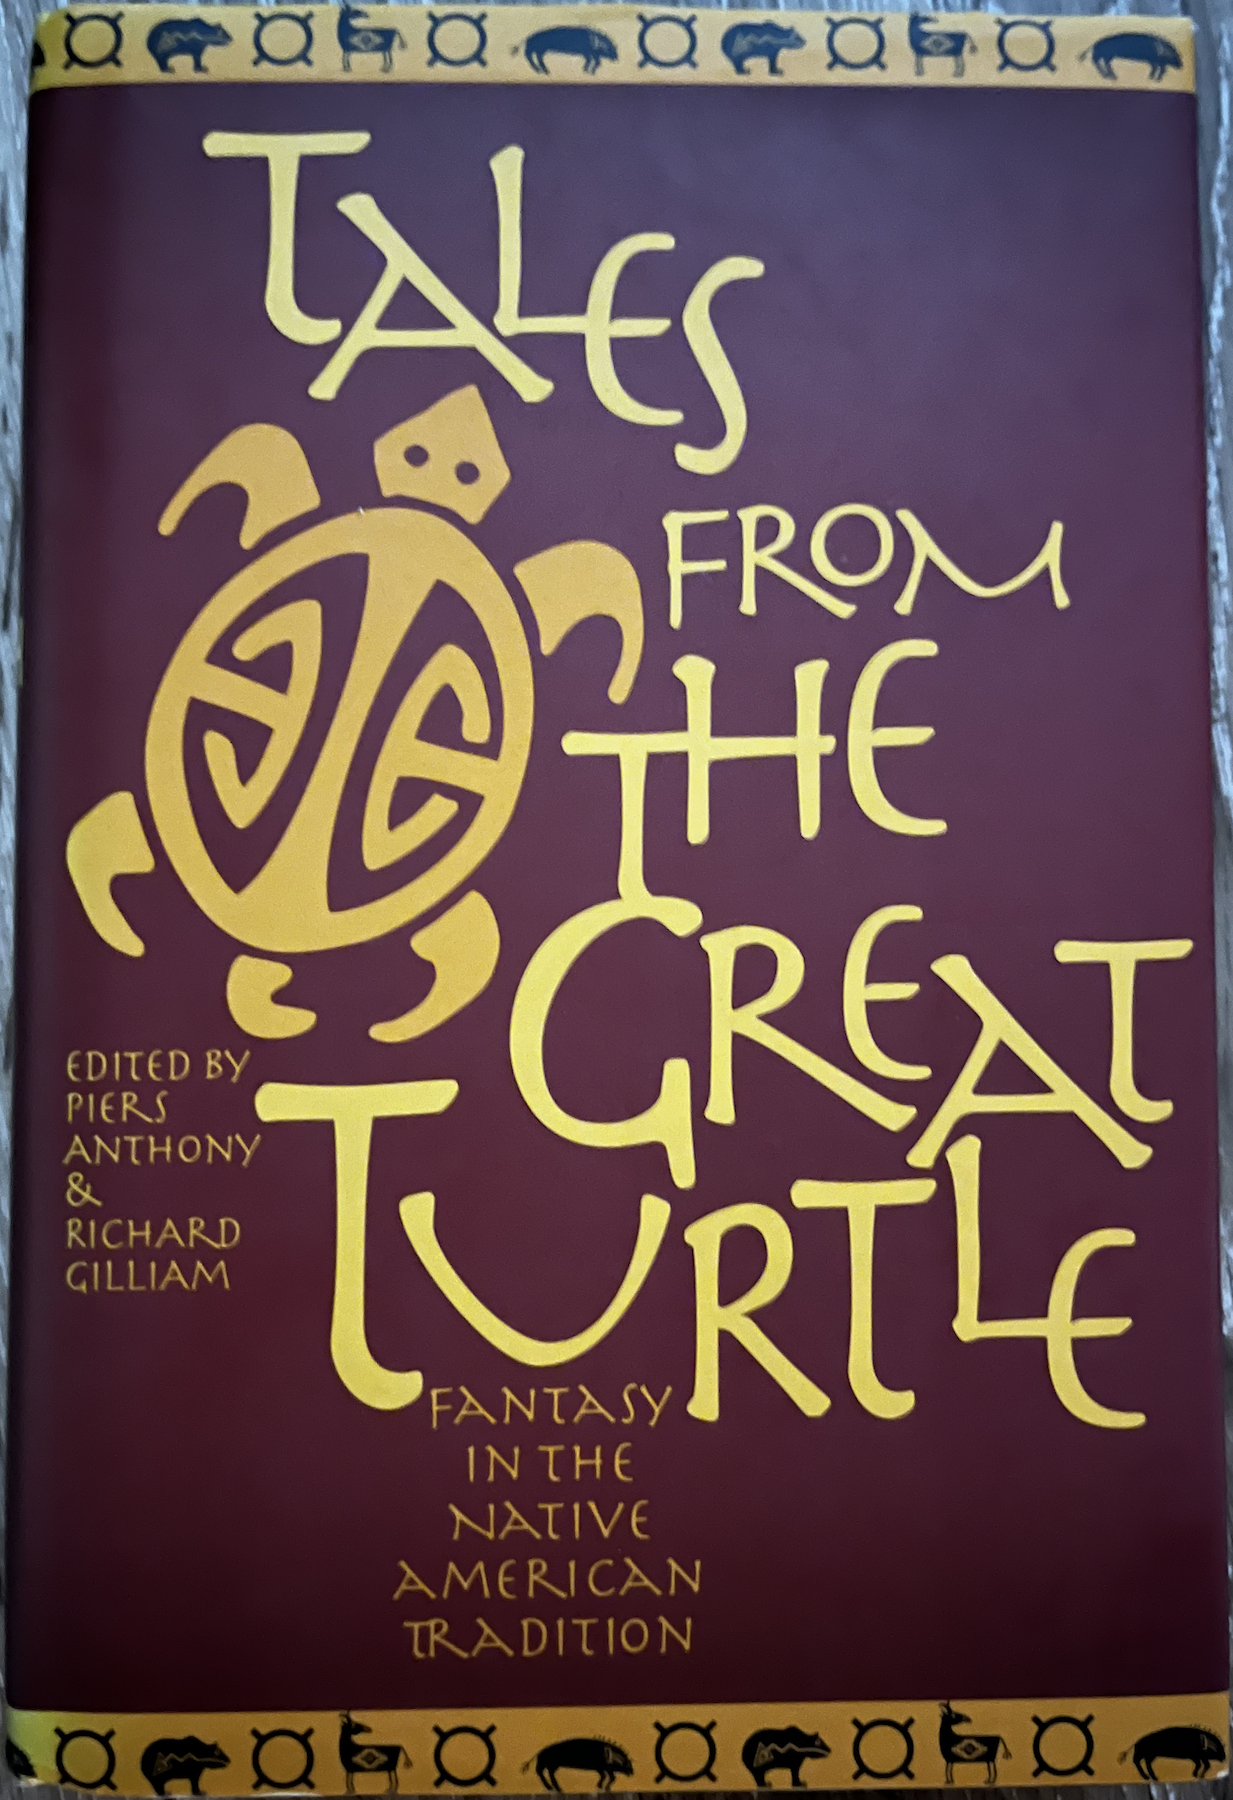 Tales From The Great Turtle hardback cover